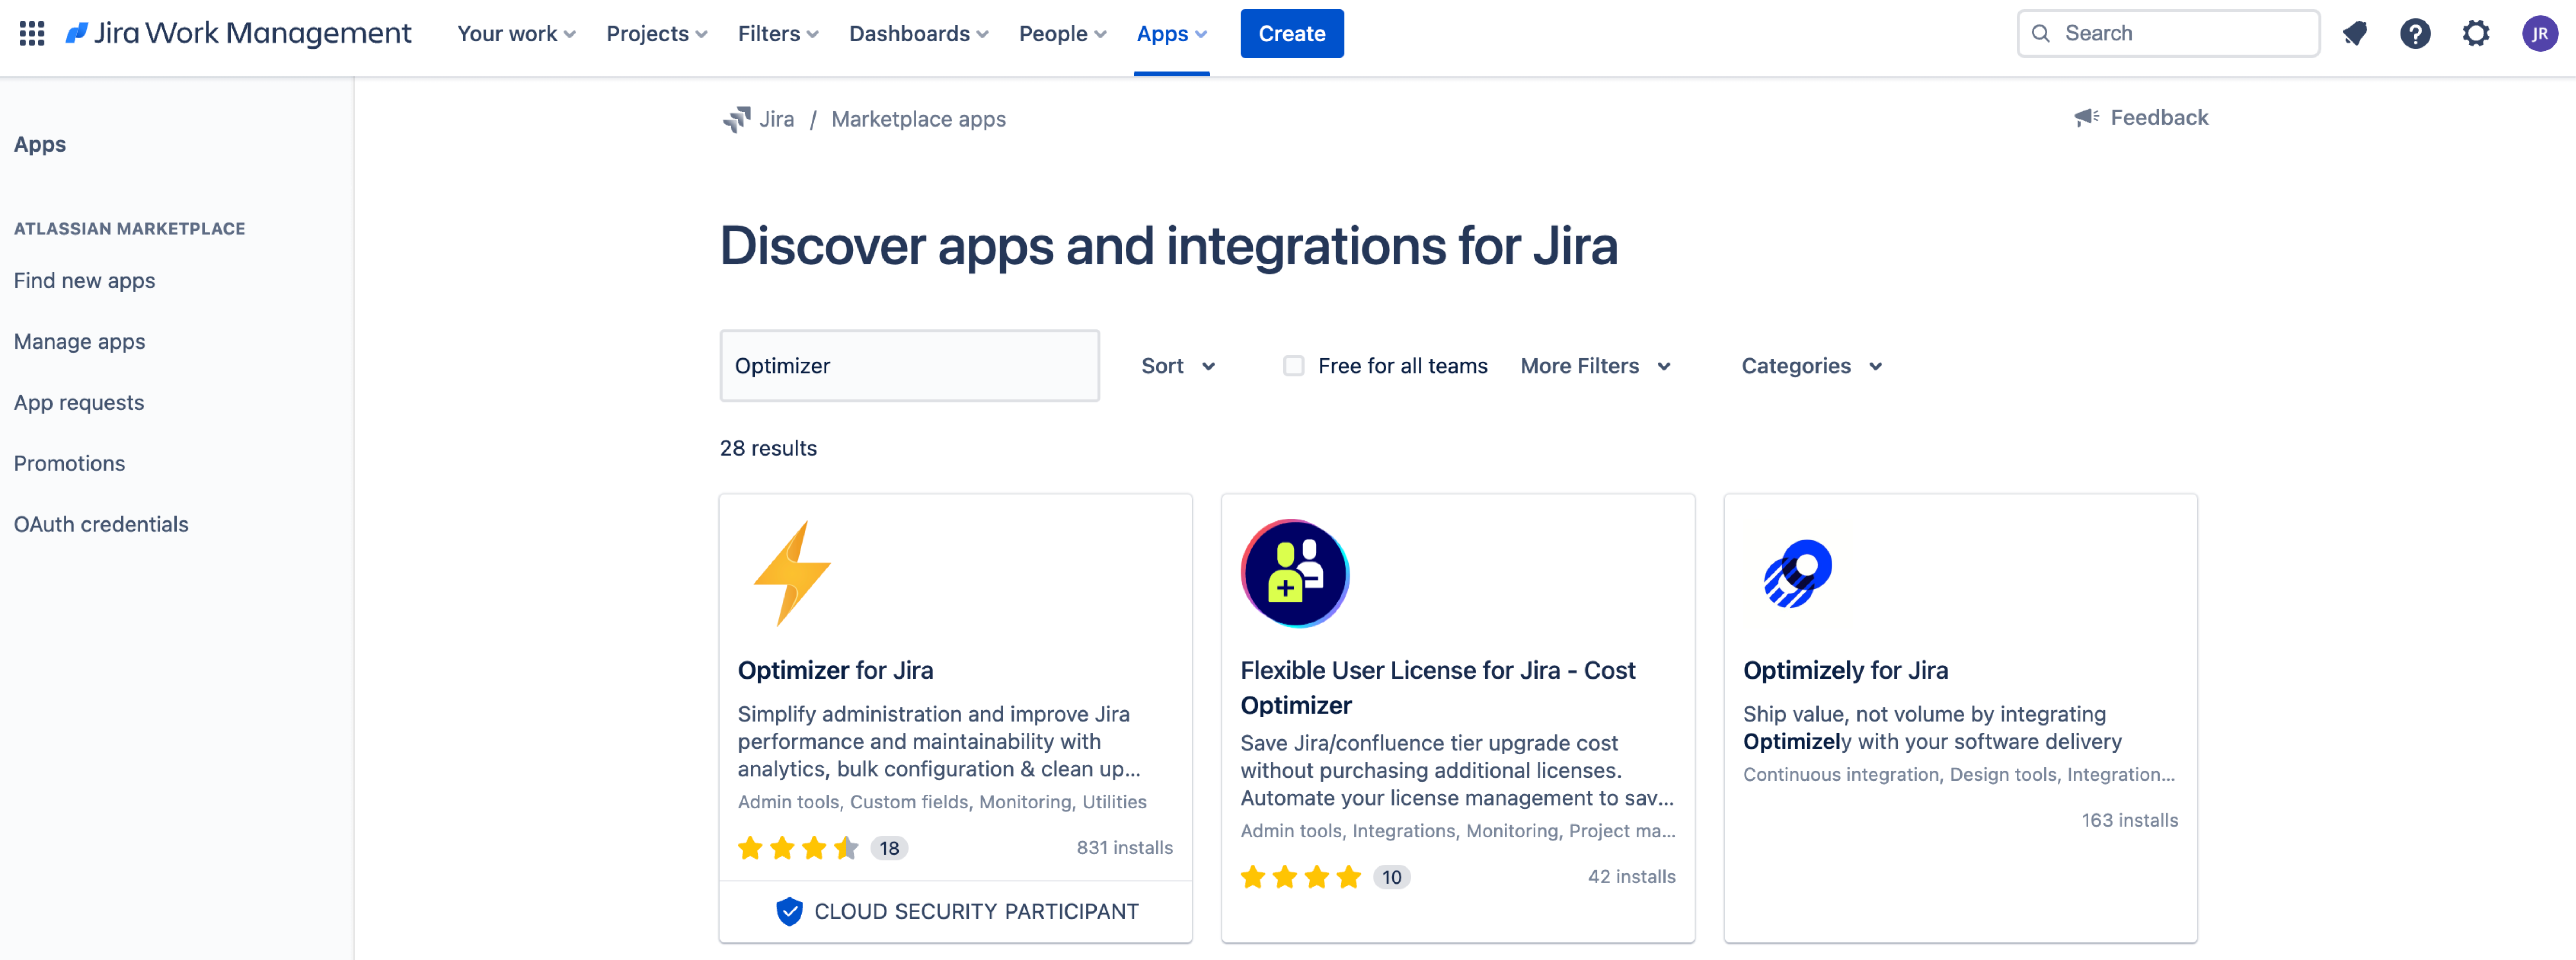 Searching for Optimizer in the built-in app marketplace in Jira.